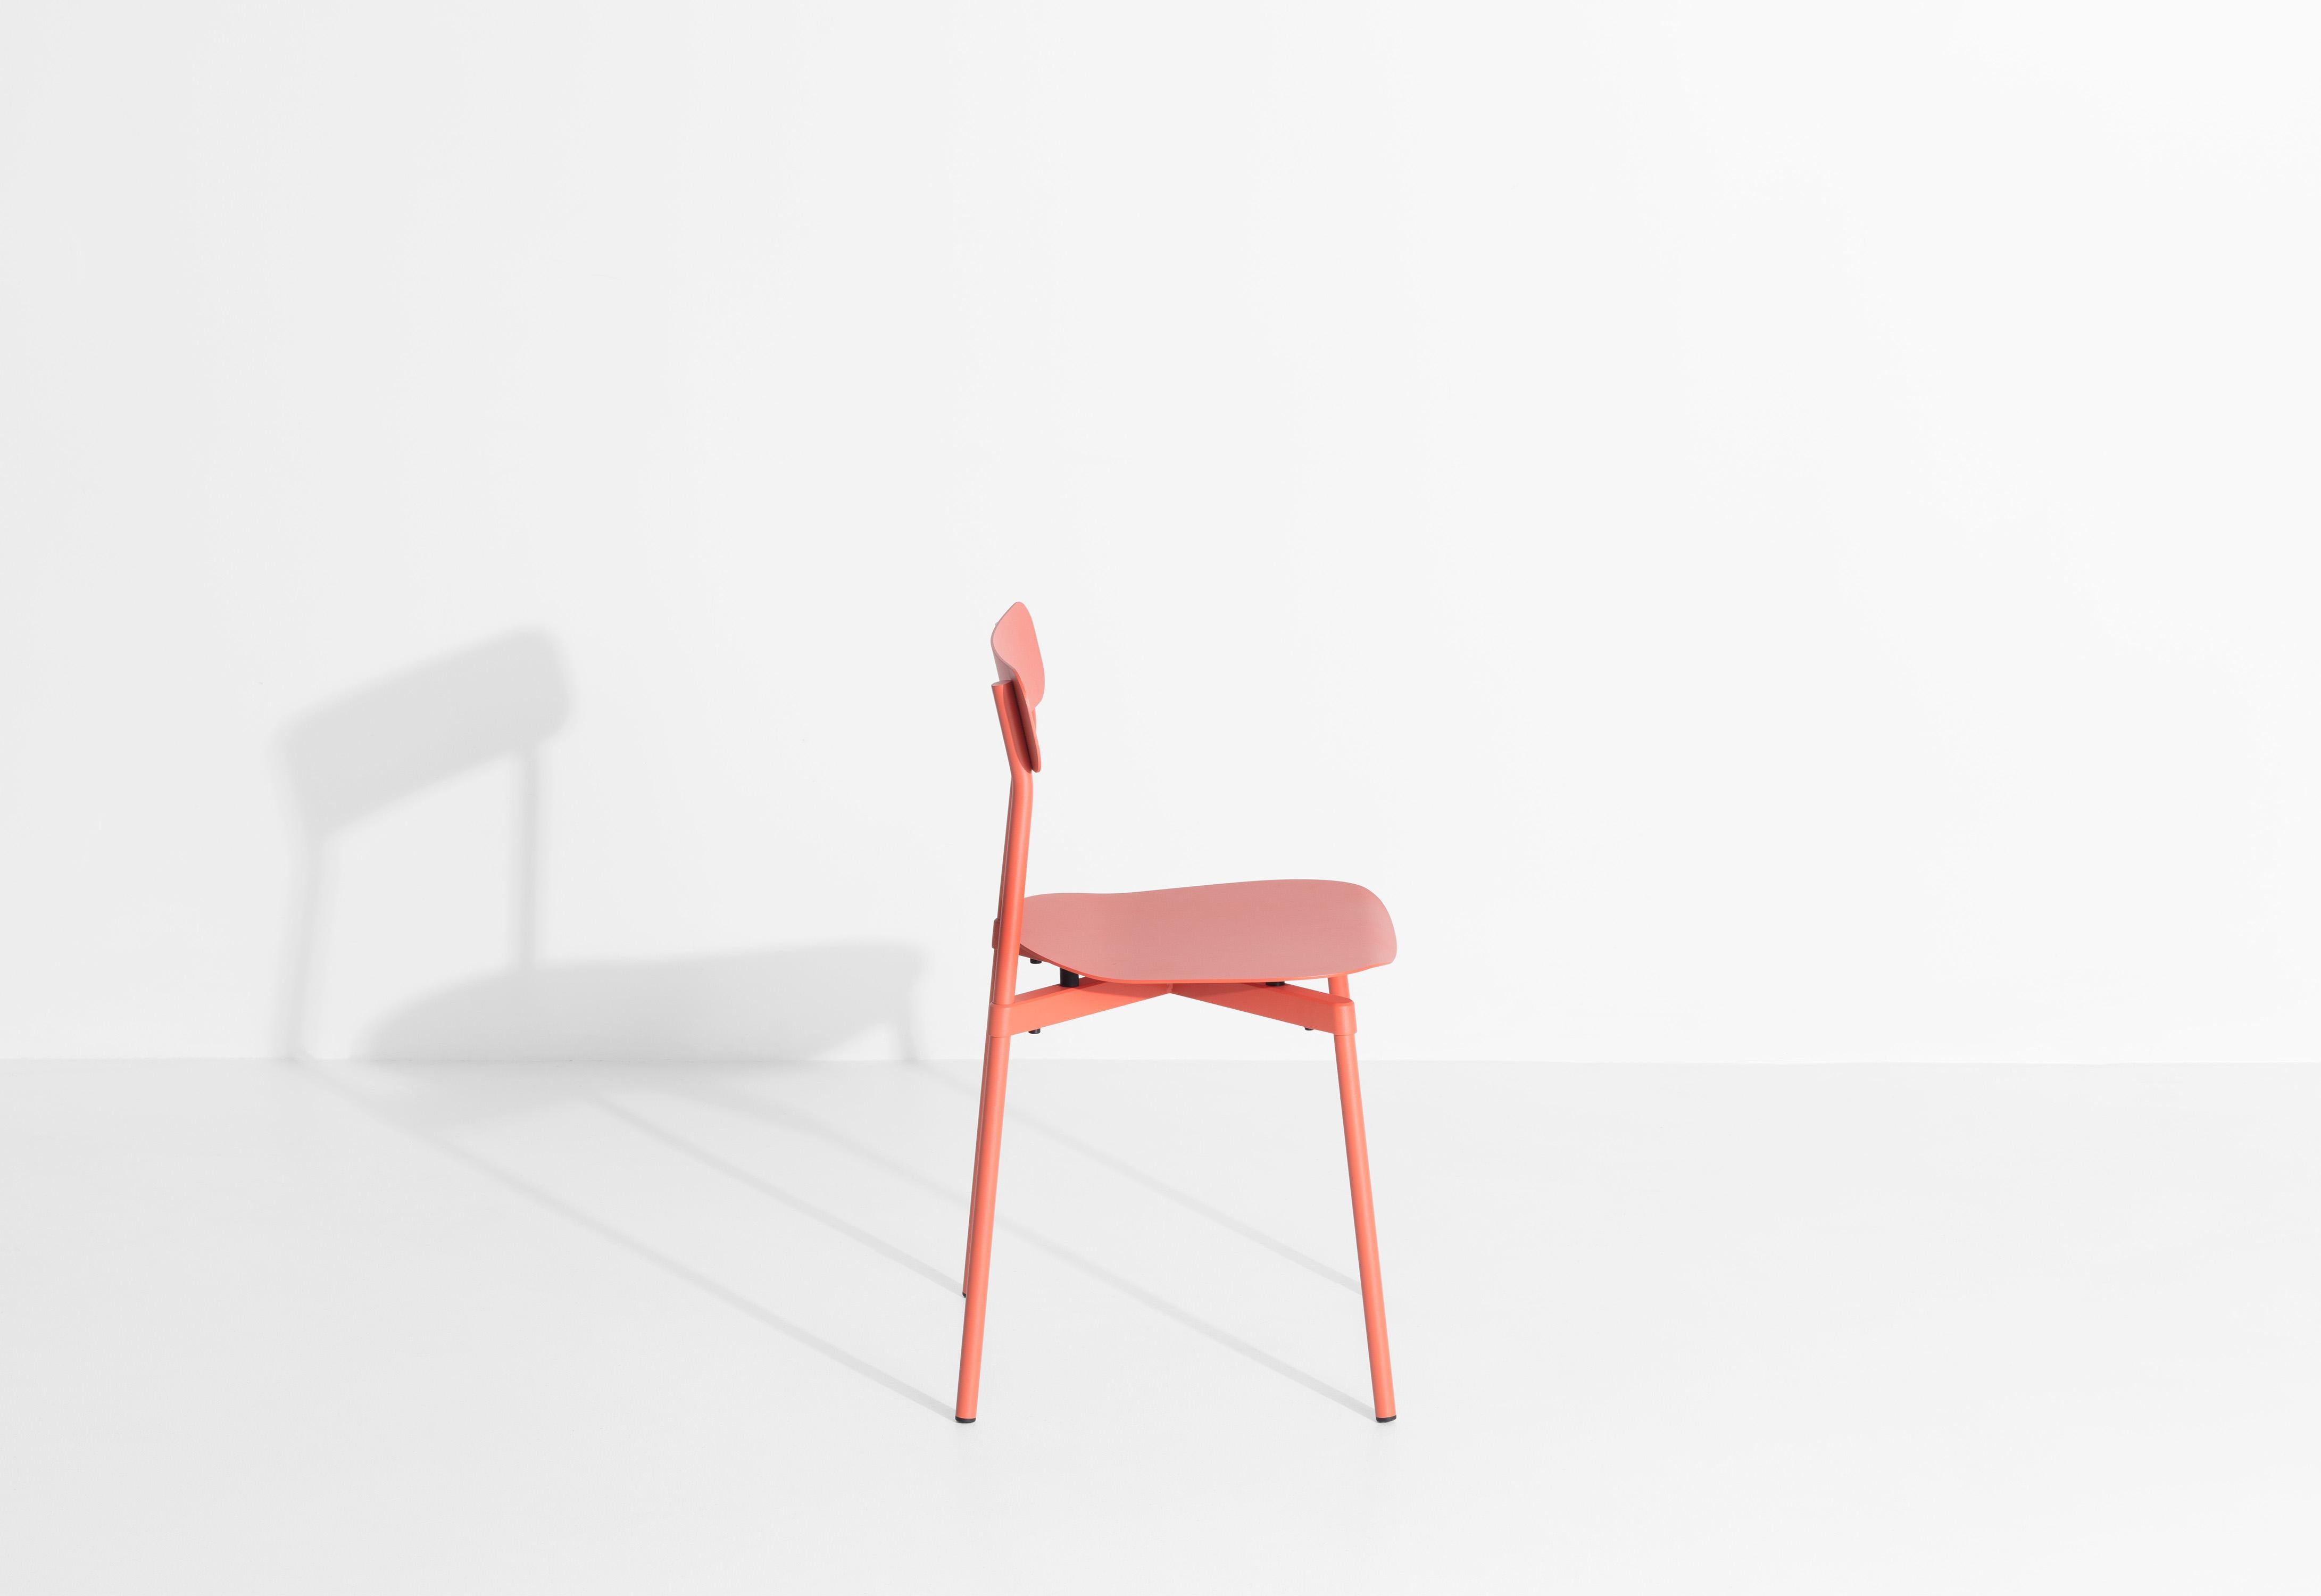 Chinese Petite Friture Fromme Chair in Coral Aluminium by Tom Chung, 2019 For Sale